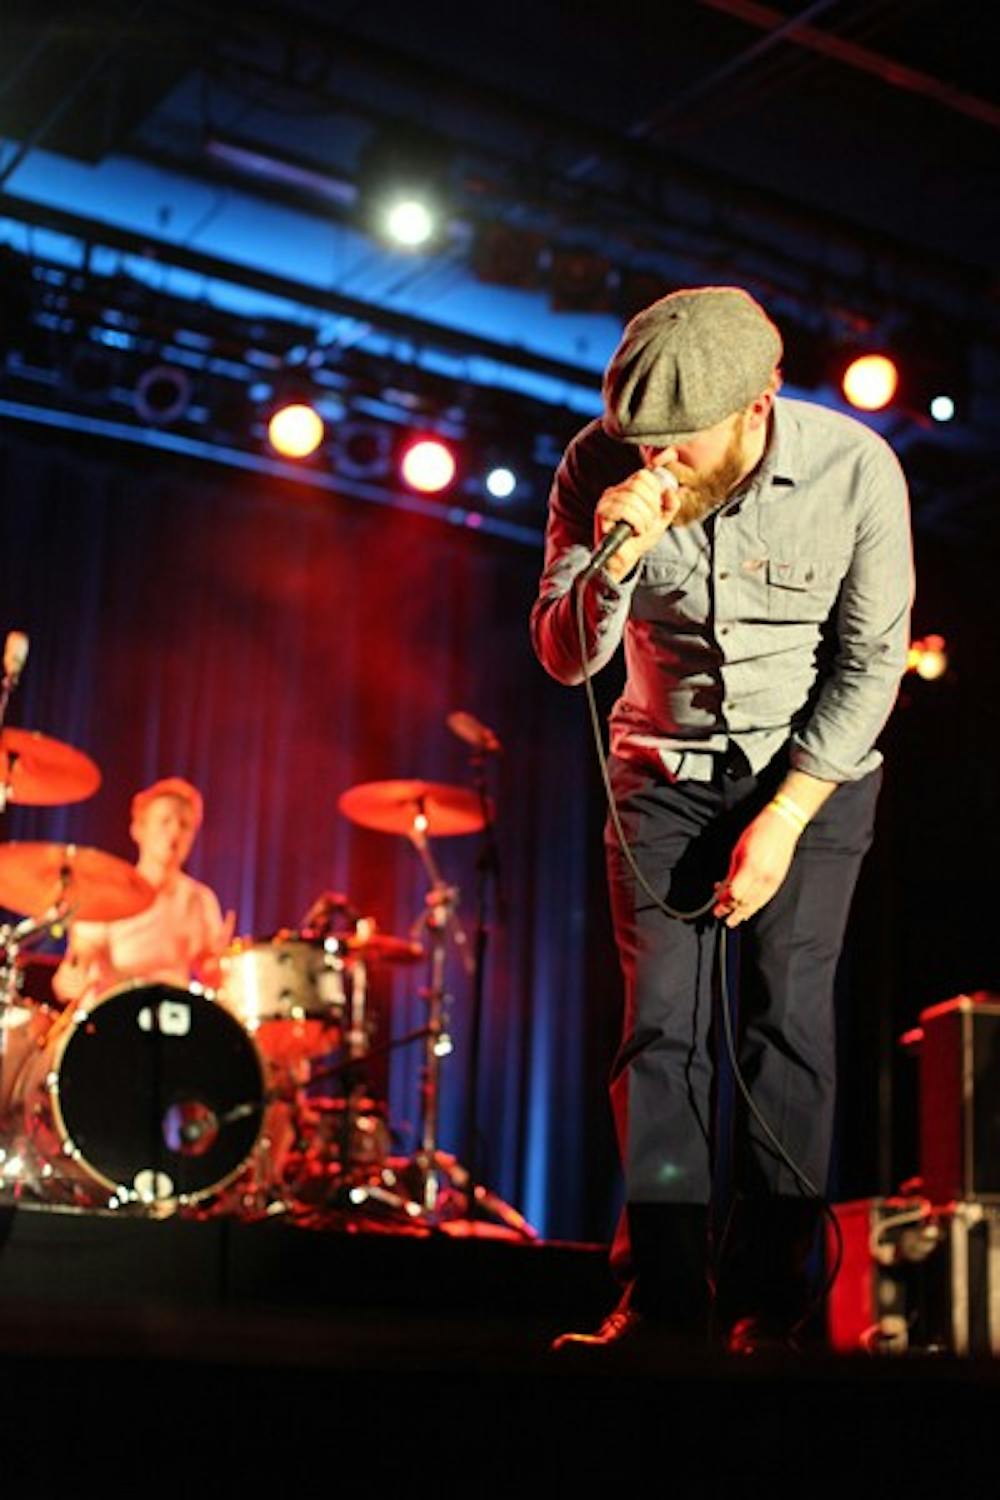 Alex Clare performs at the Marquee Theater on Tuesday night. He performed songs from his debut album 'The Lateness of the Hour.' (Photo by Perla Farias)